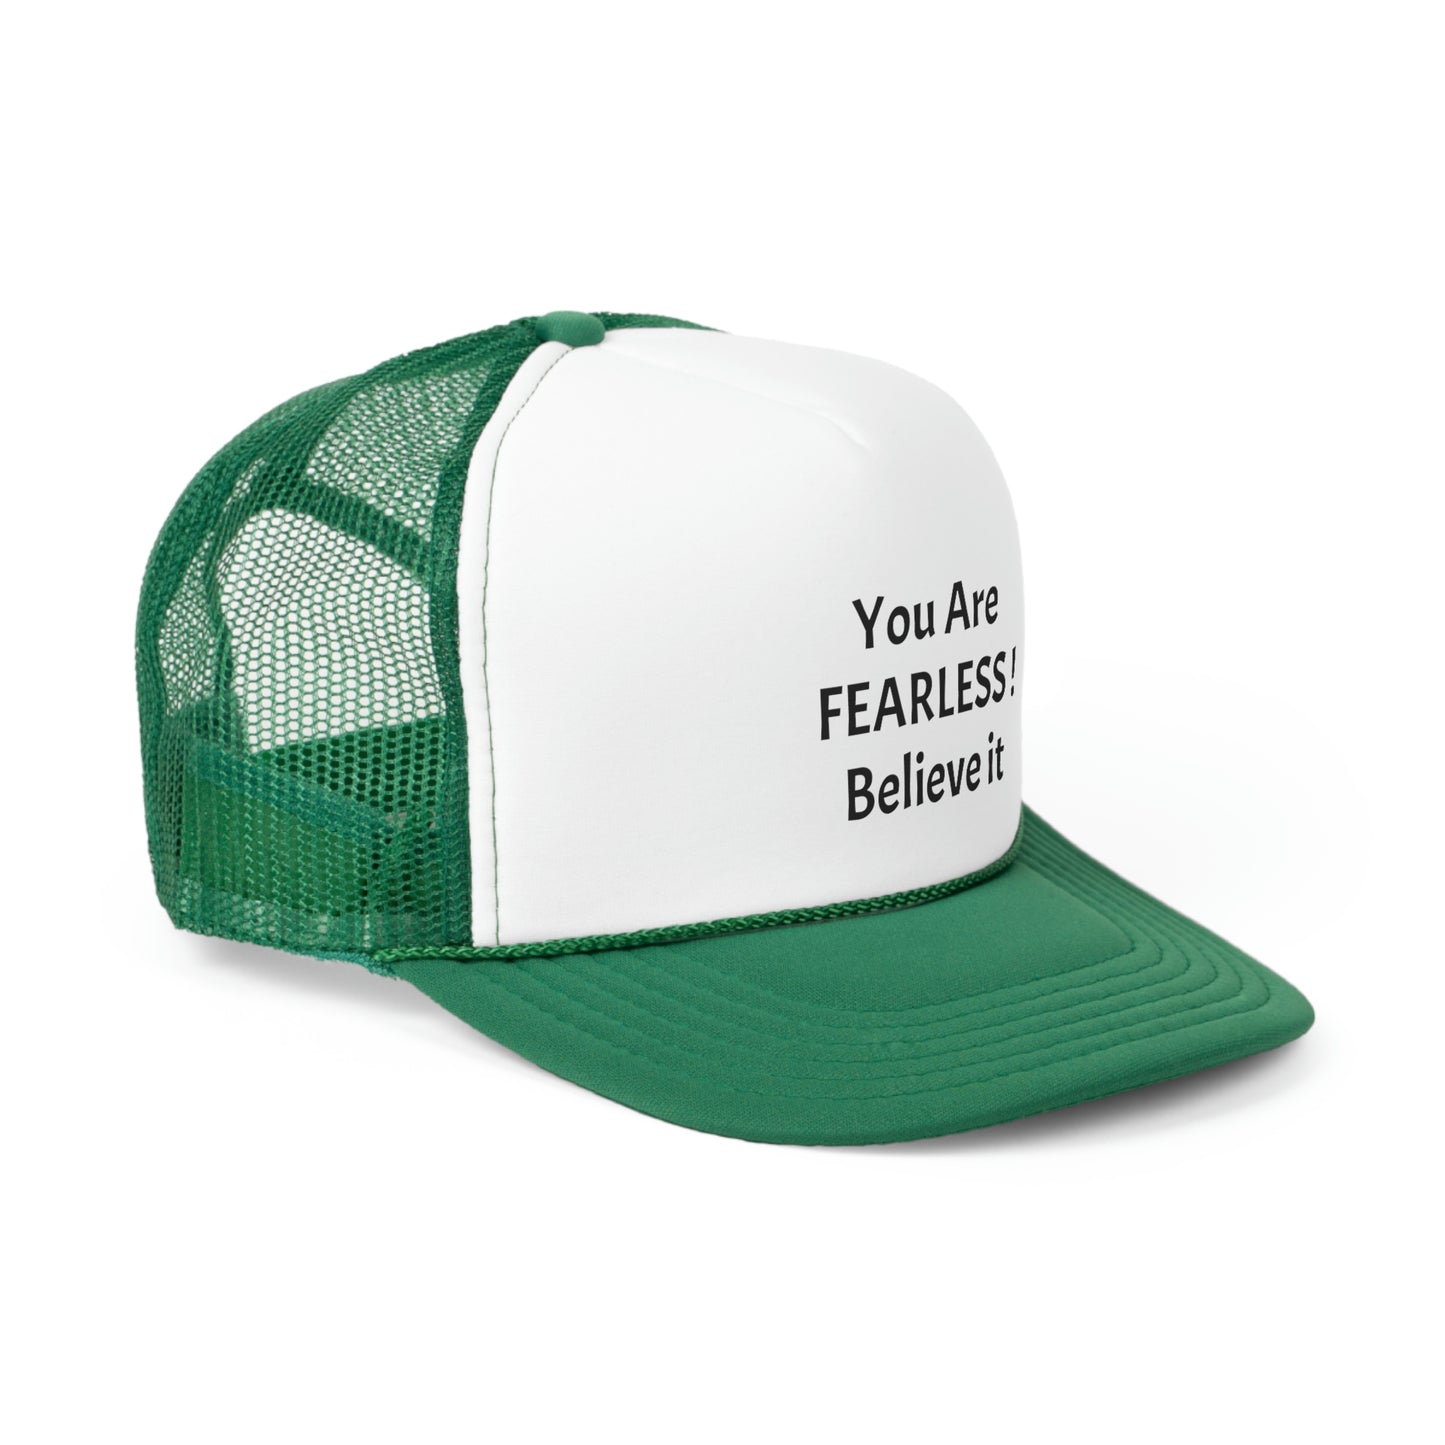 You are Fearless! Trucker Caps